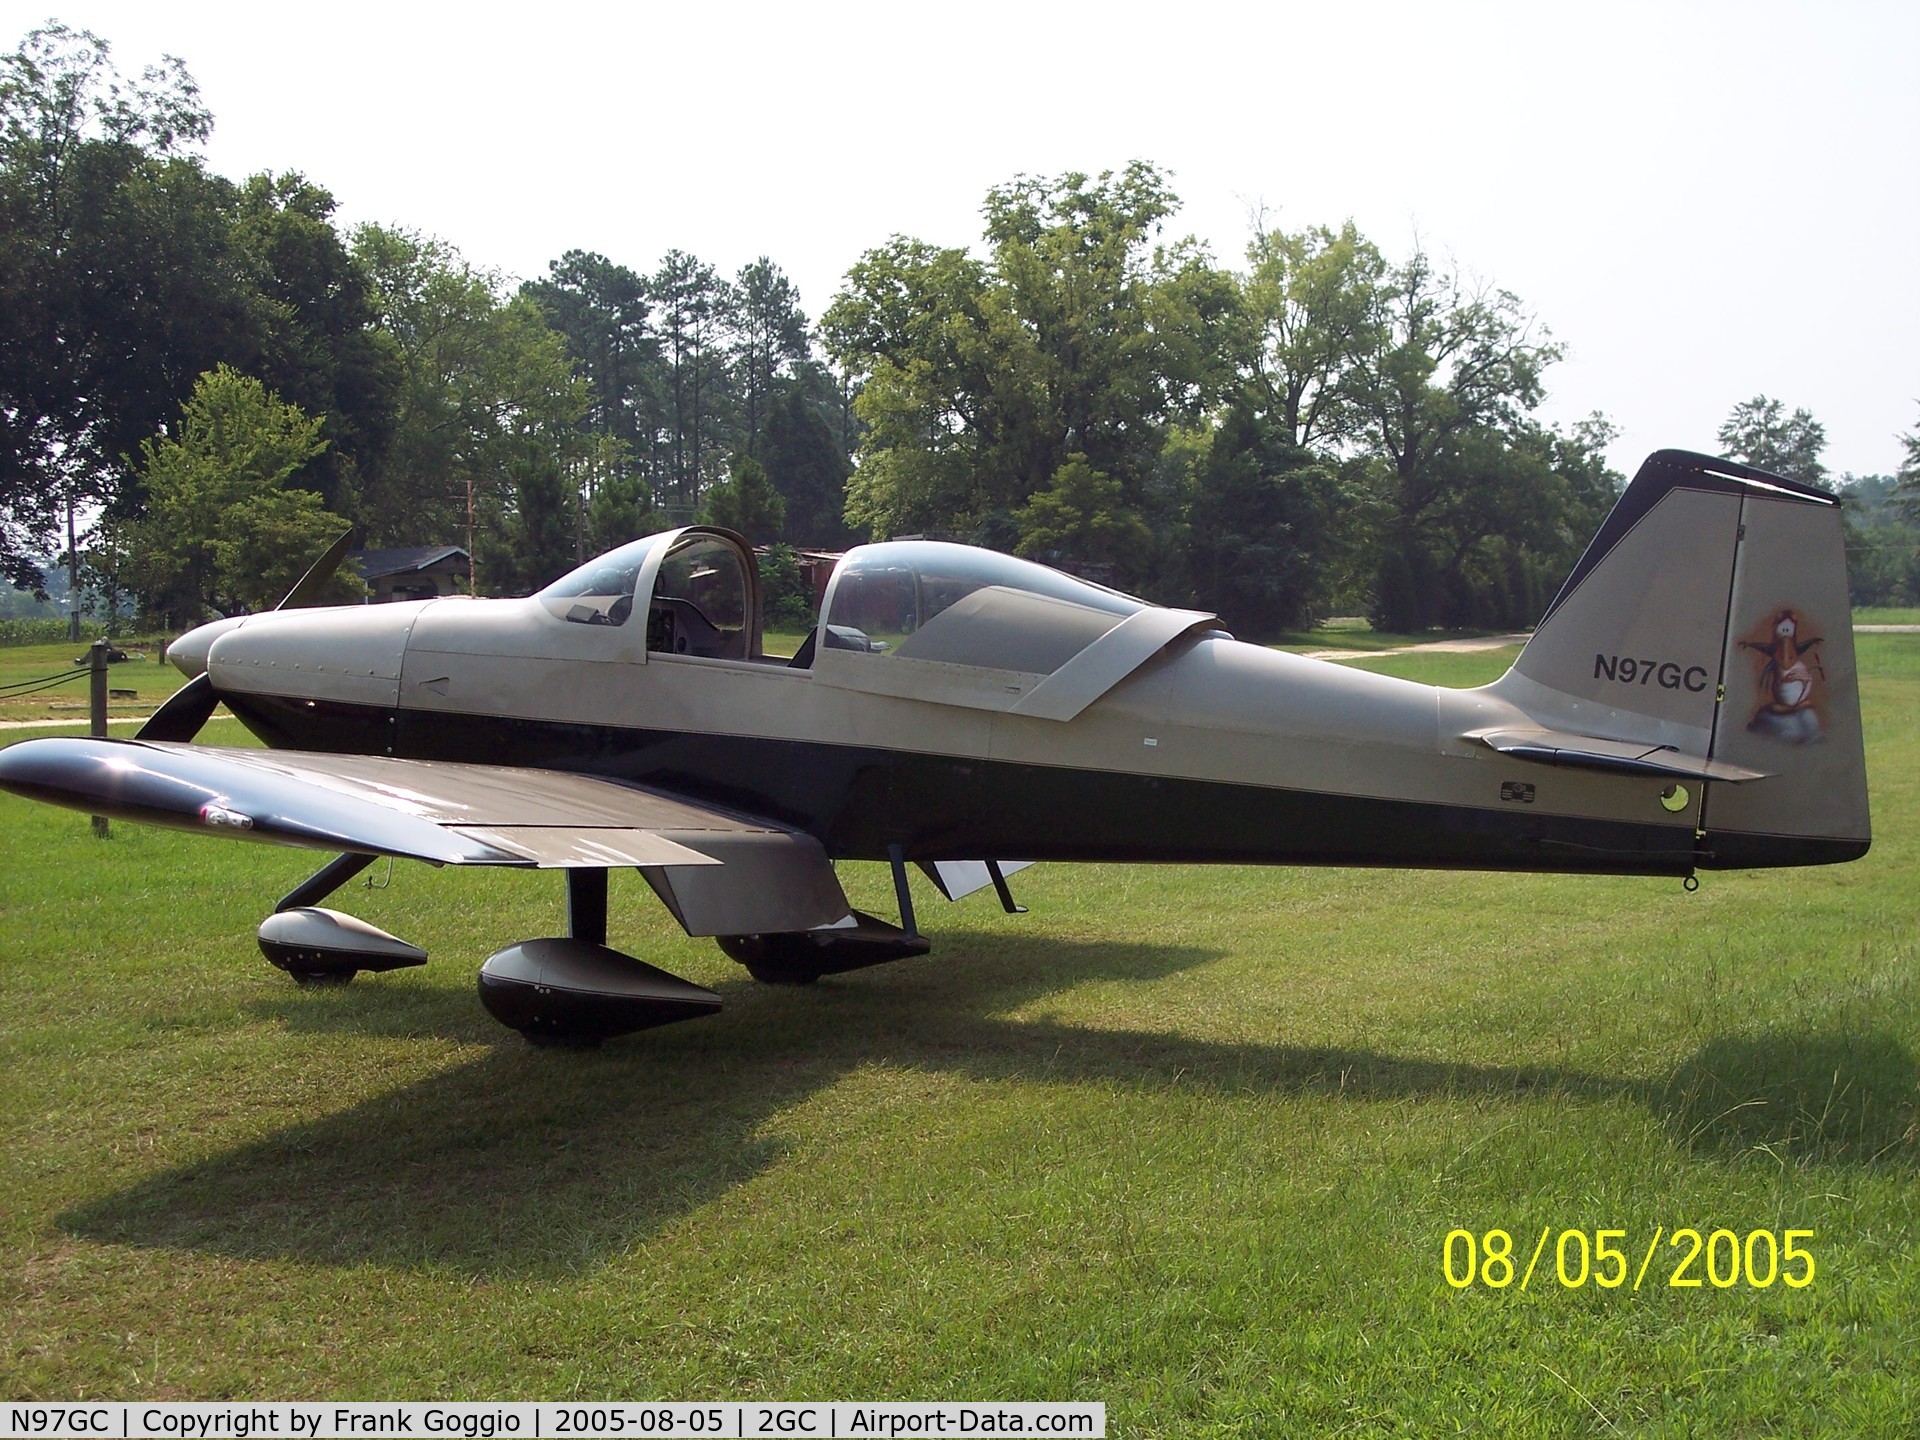 N97GC, Vans RV-6A C/N 25611, Black & Gold RV6-A with cartoon character 'Opus' on tail